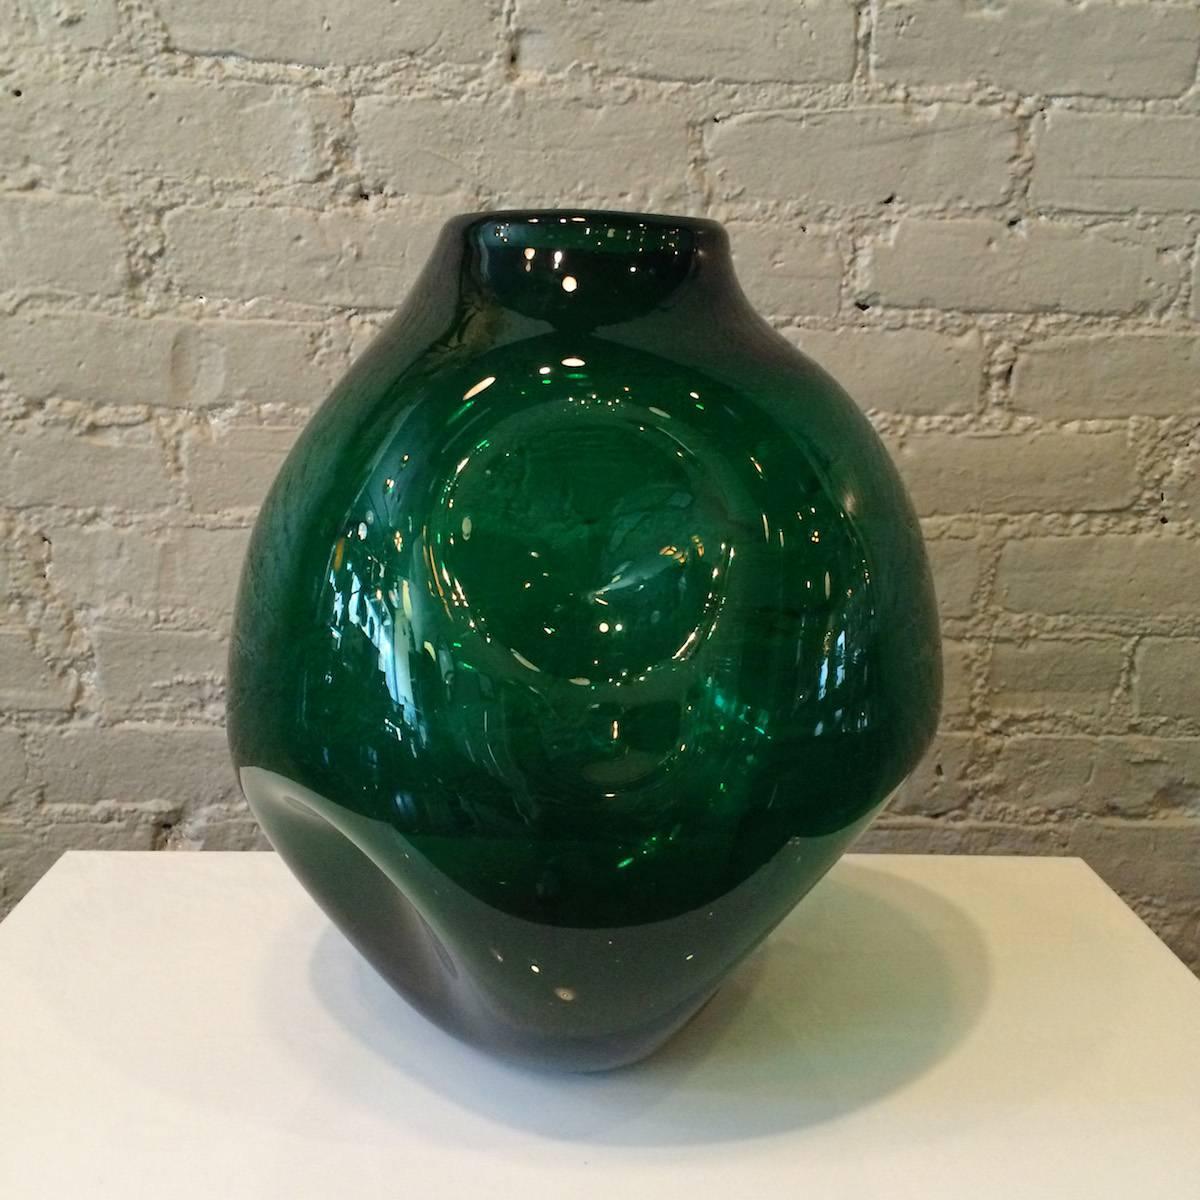 Impressively large, mid century modern, emerald green, dimpled, art glass vessel by Winslow Anderson for Blenko.